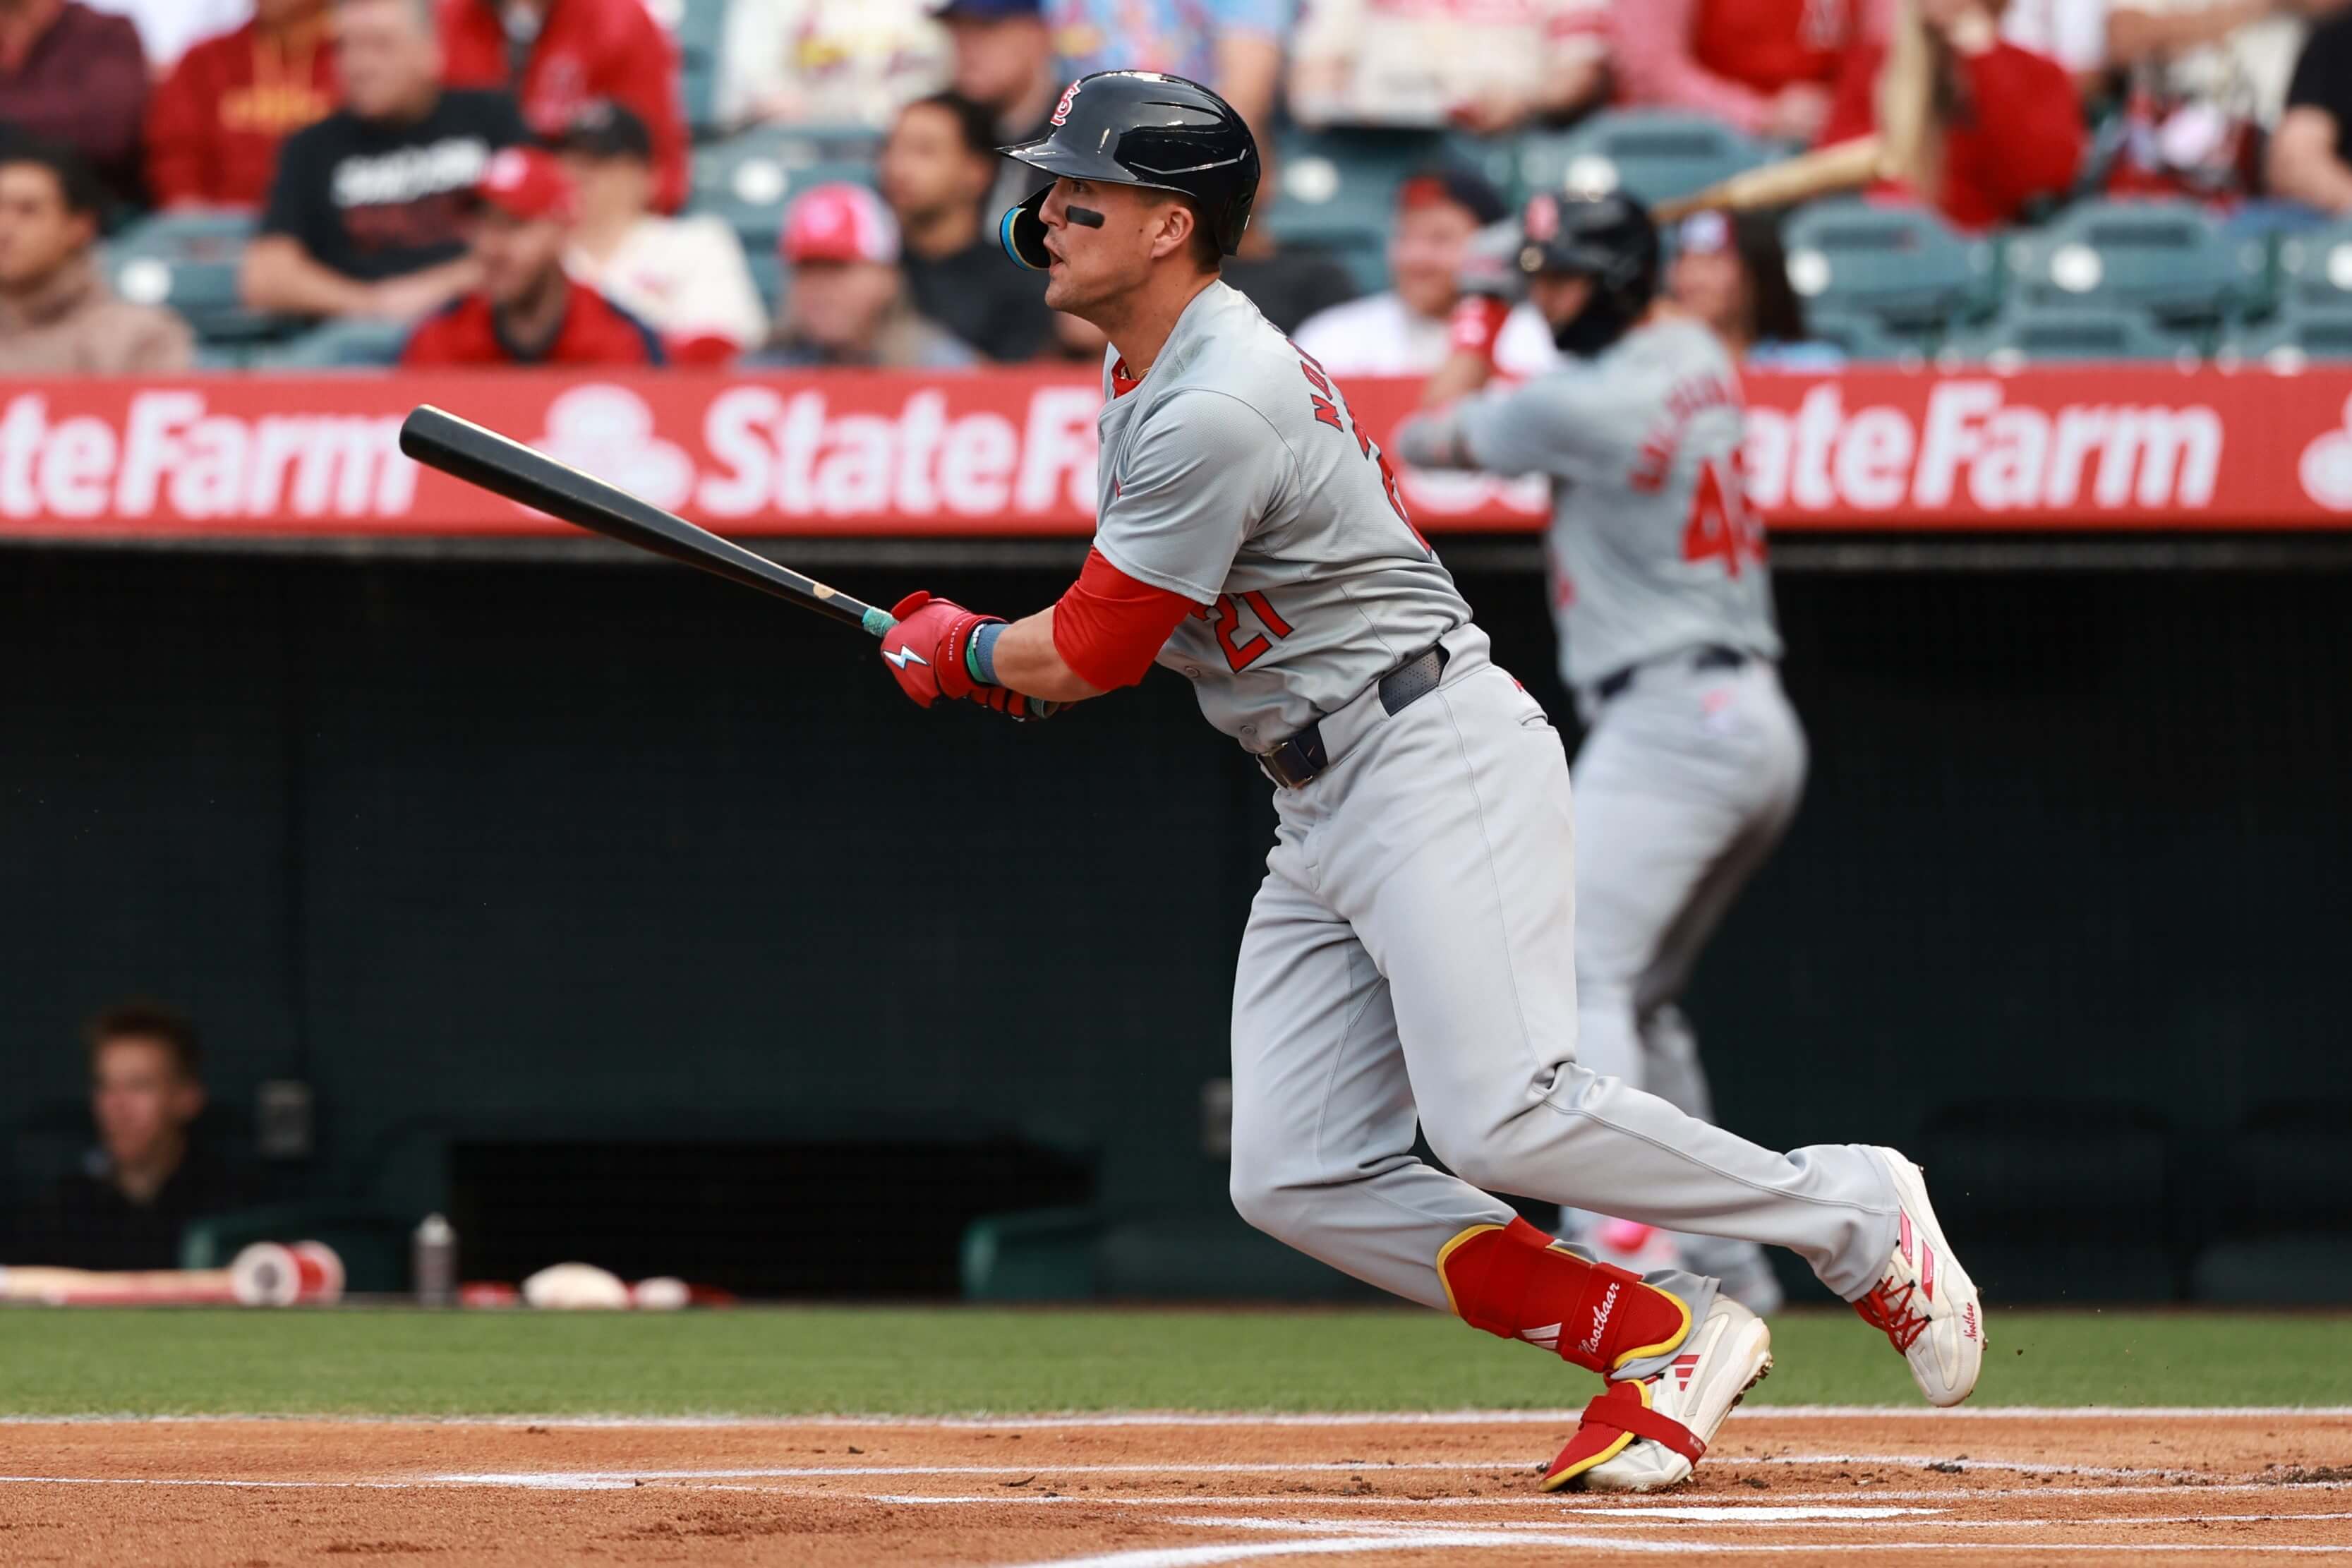 Cardinals vs Reds Prediction, Picks, and Odds for Today’s MLB Game